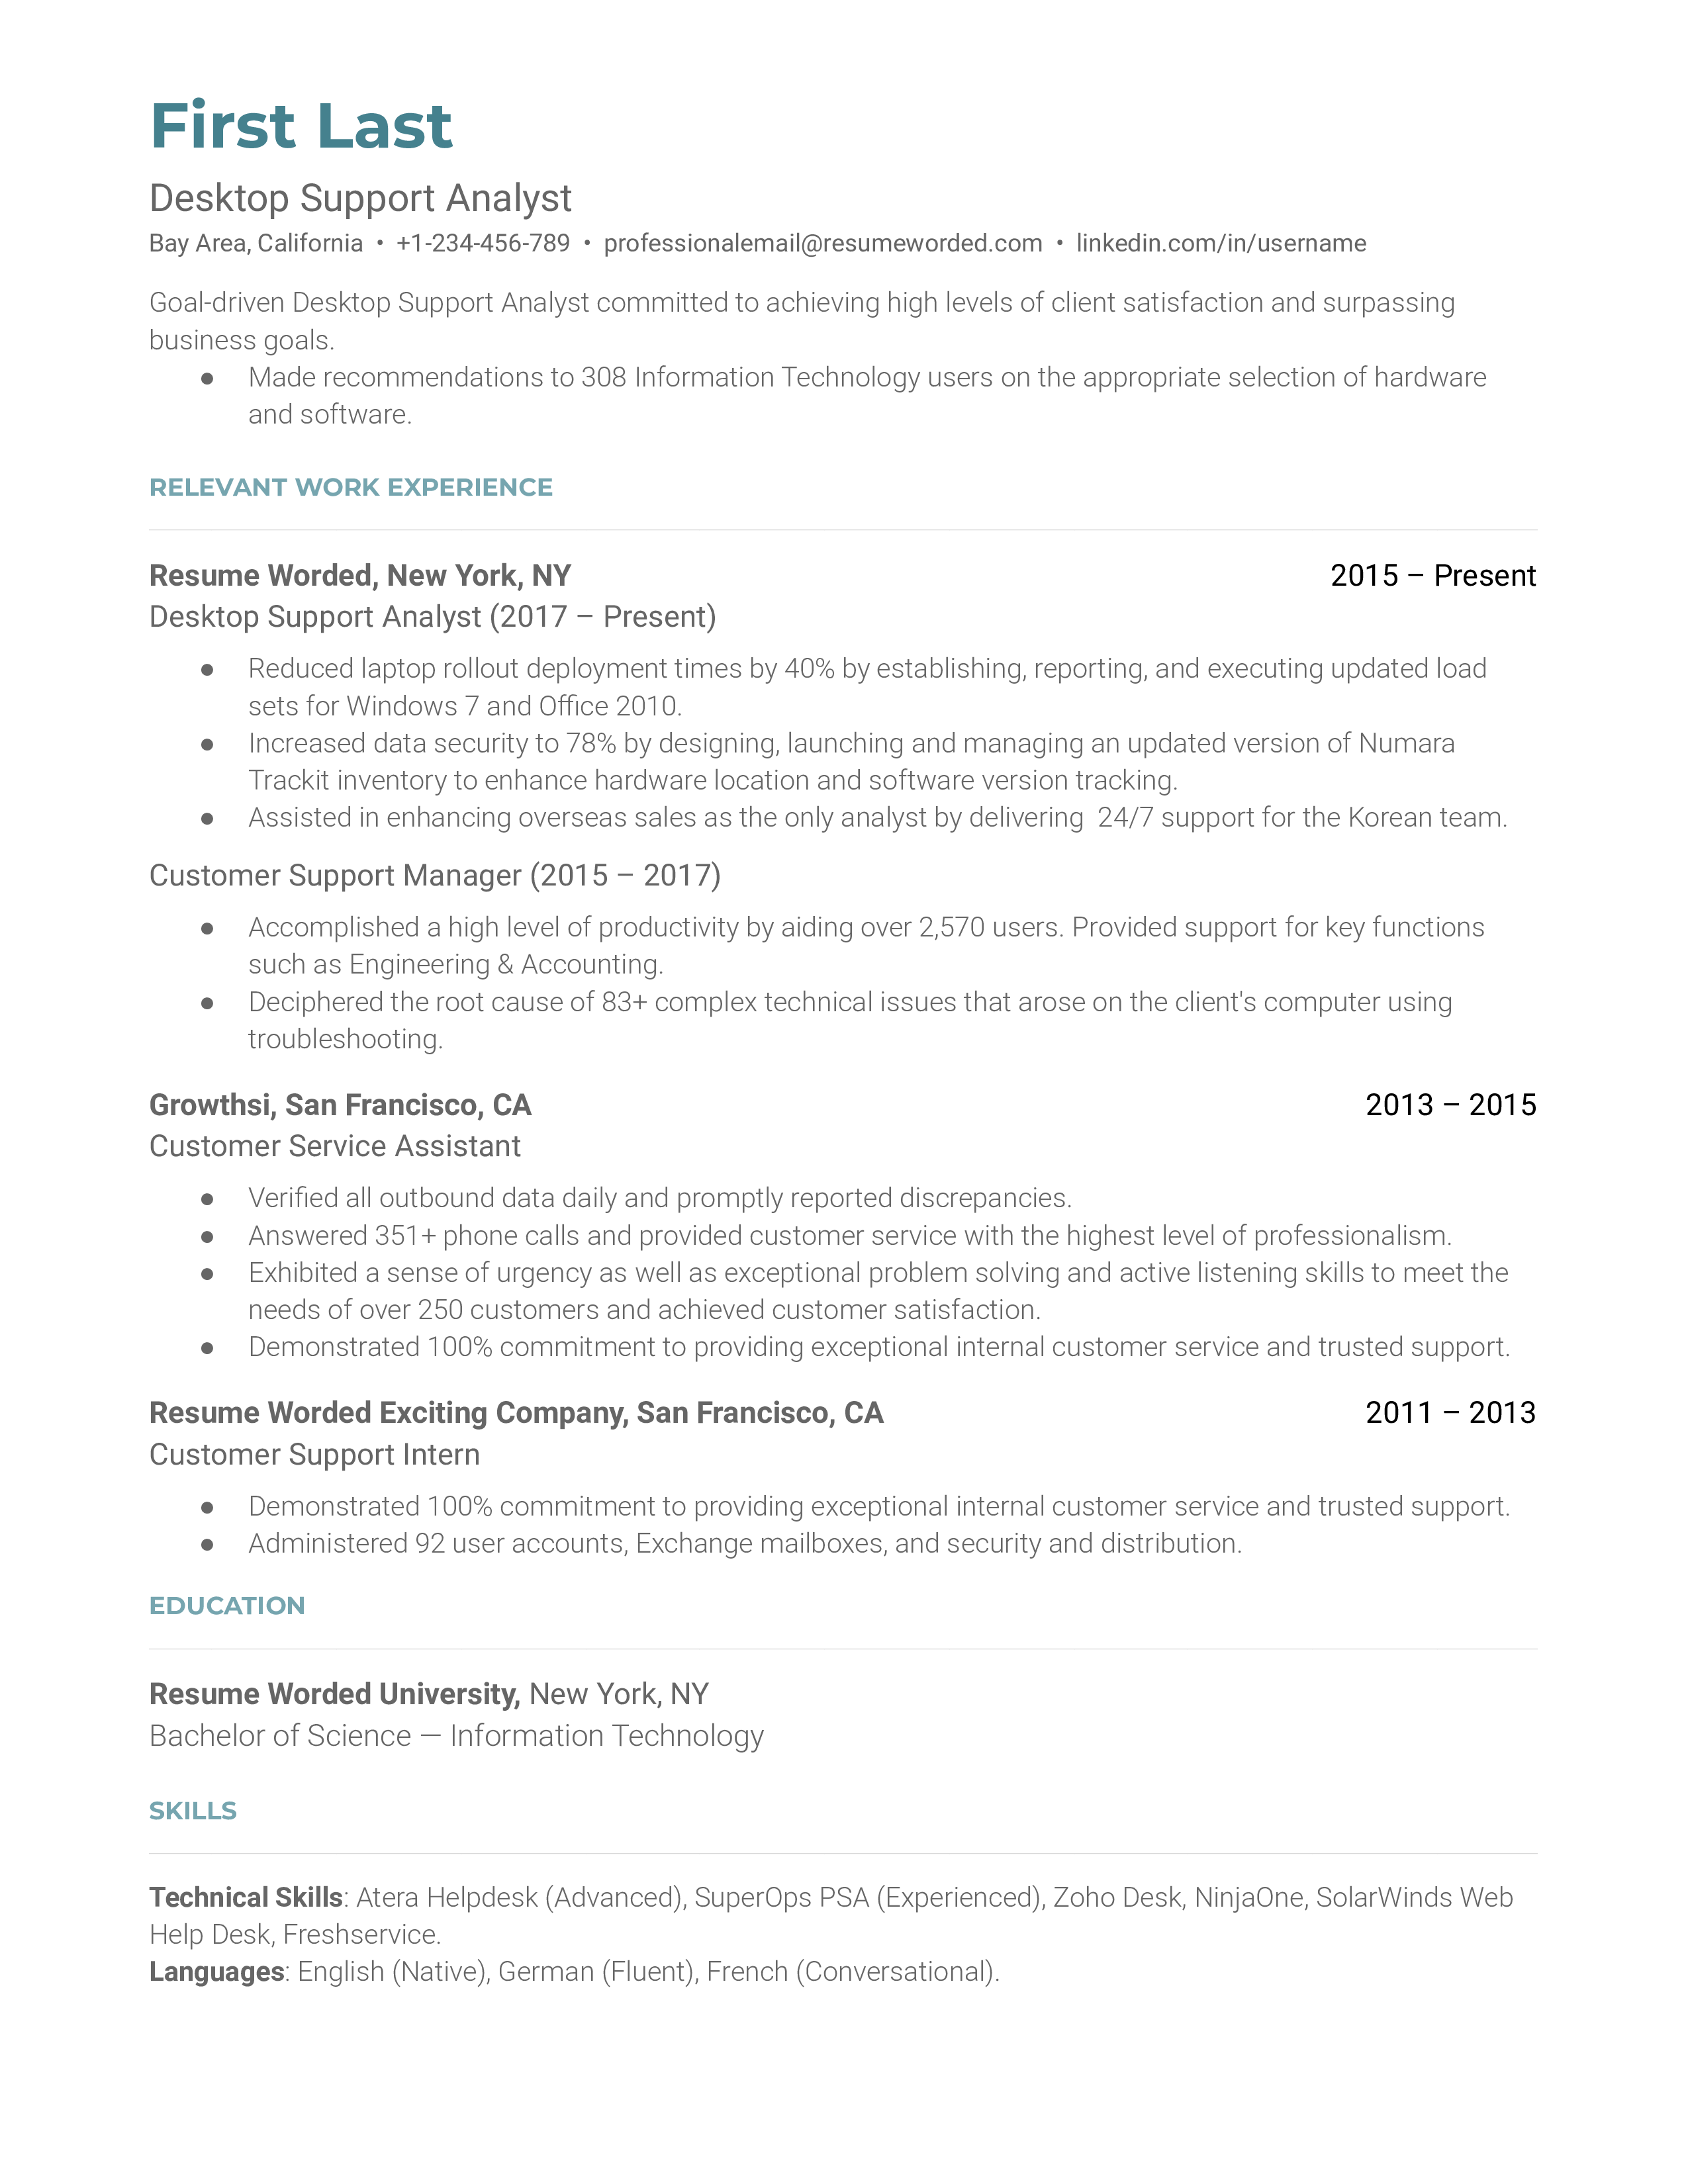 A Desktop Support Analyst resume highlighting relevant work experience.